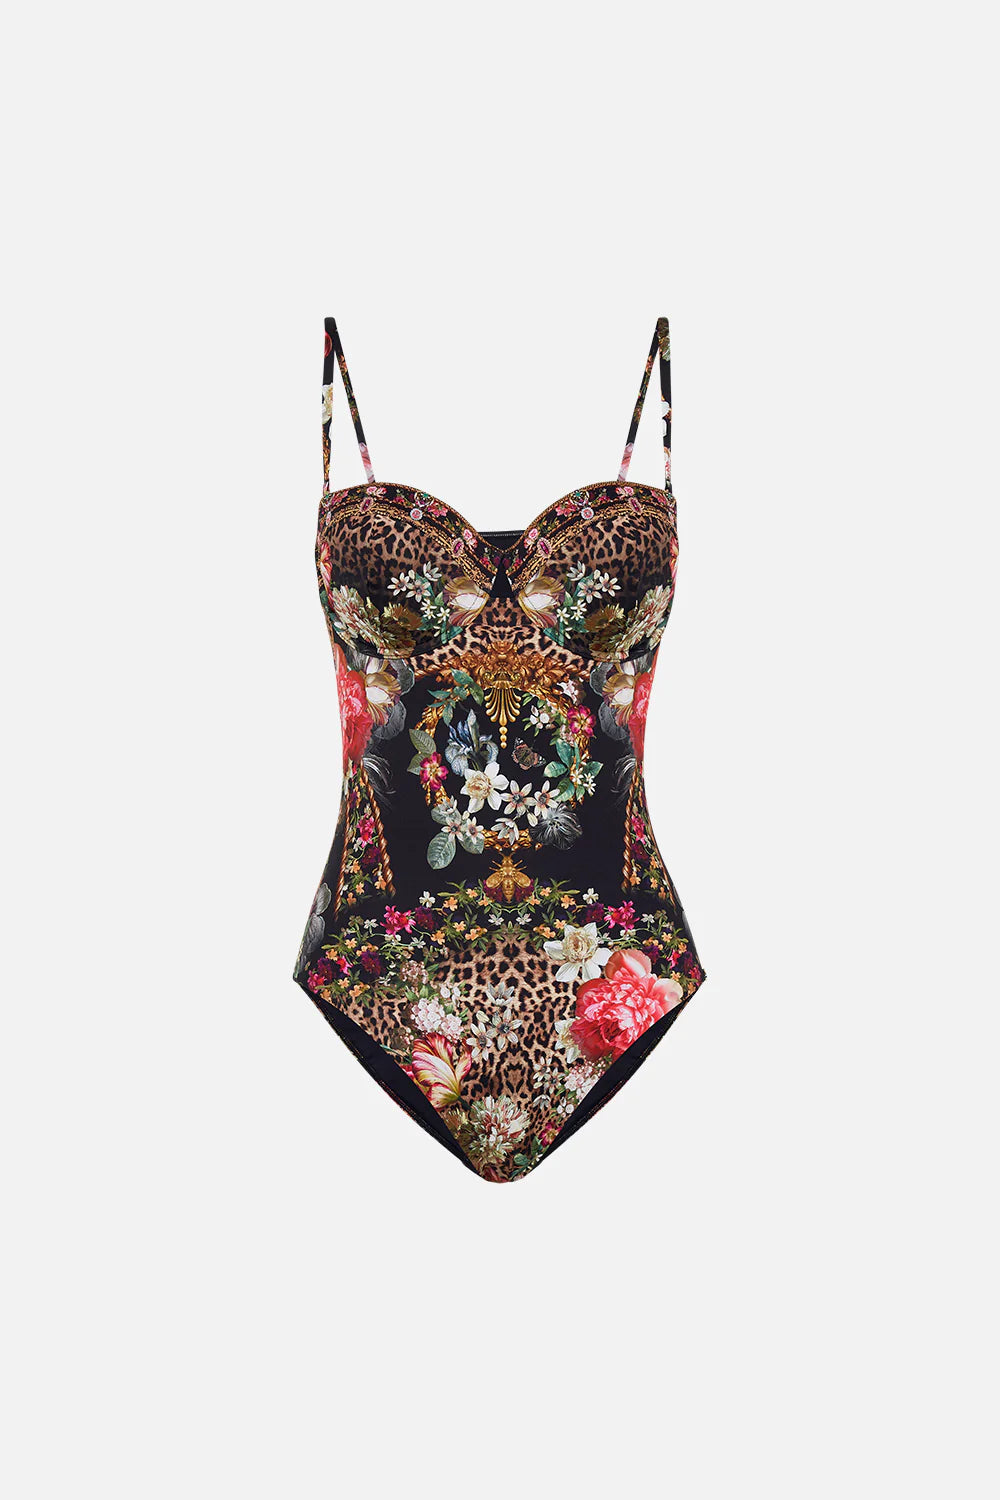 CAMILLA UNDERWIRE CUP ONE PIECE  - A NIGHT AT THE OPERA -ESCAPE CLOTHING